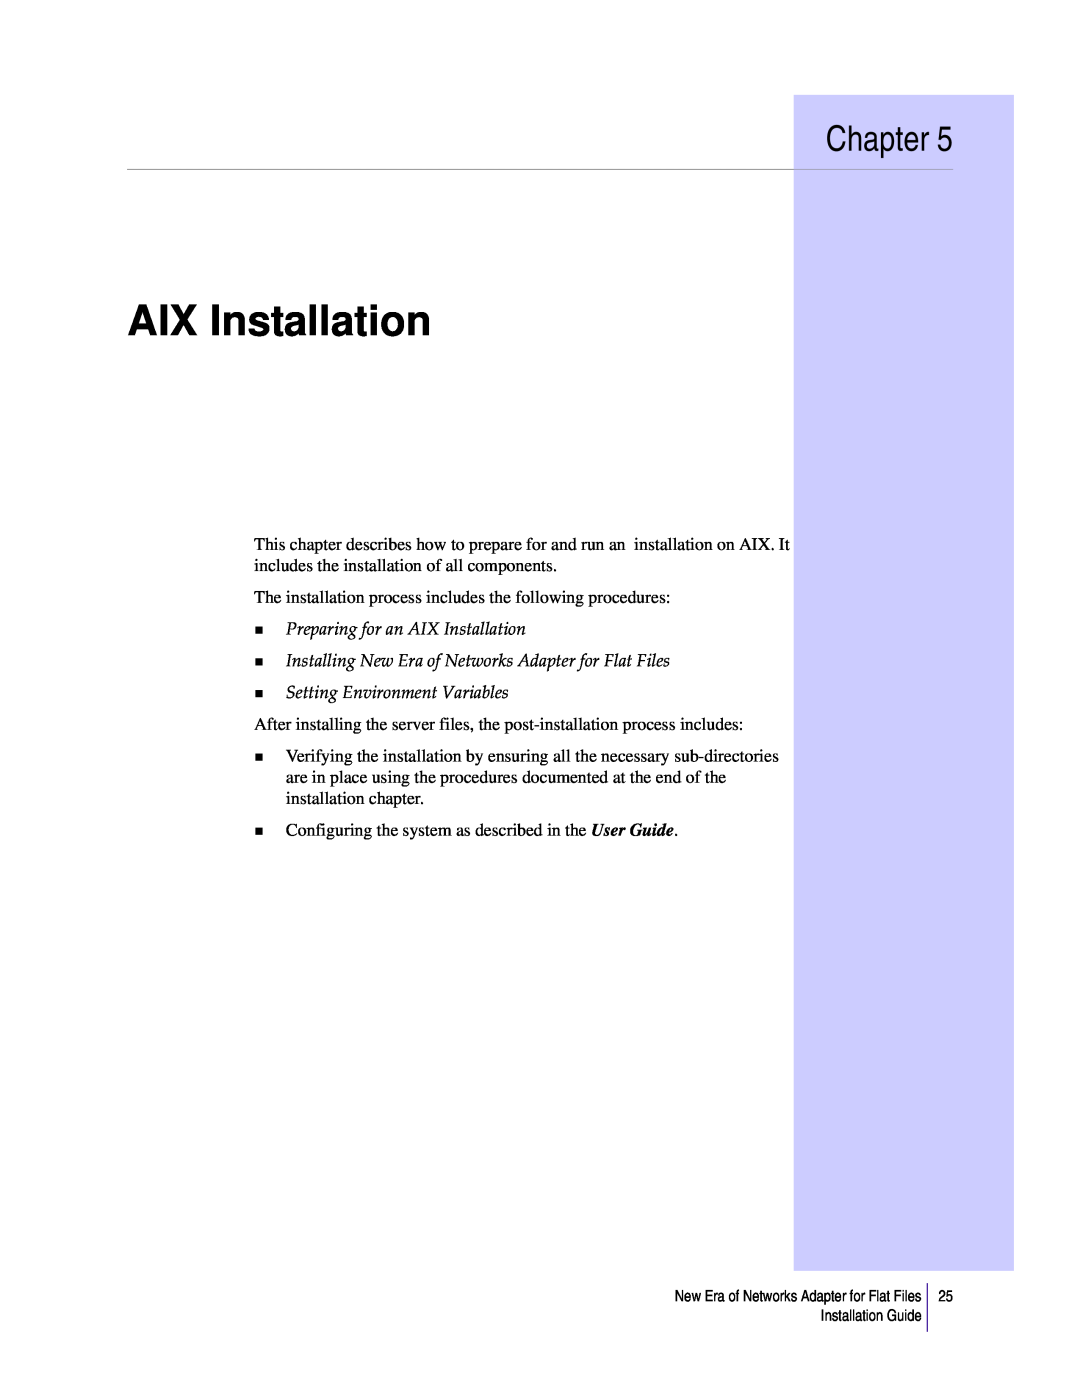 Sybase 3.8 manual Preparing for an AIX Installation, Chapter, Installing New Era of Networks Adapter for Flat Files 